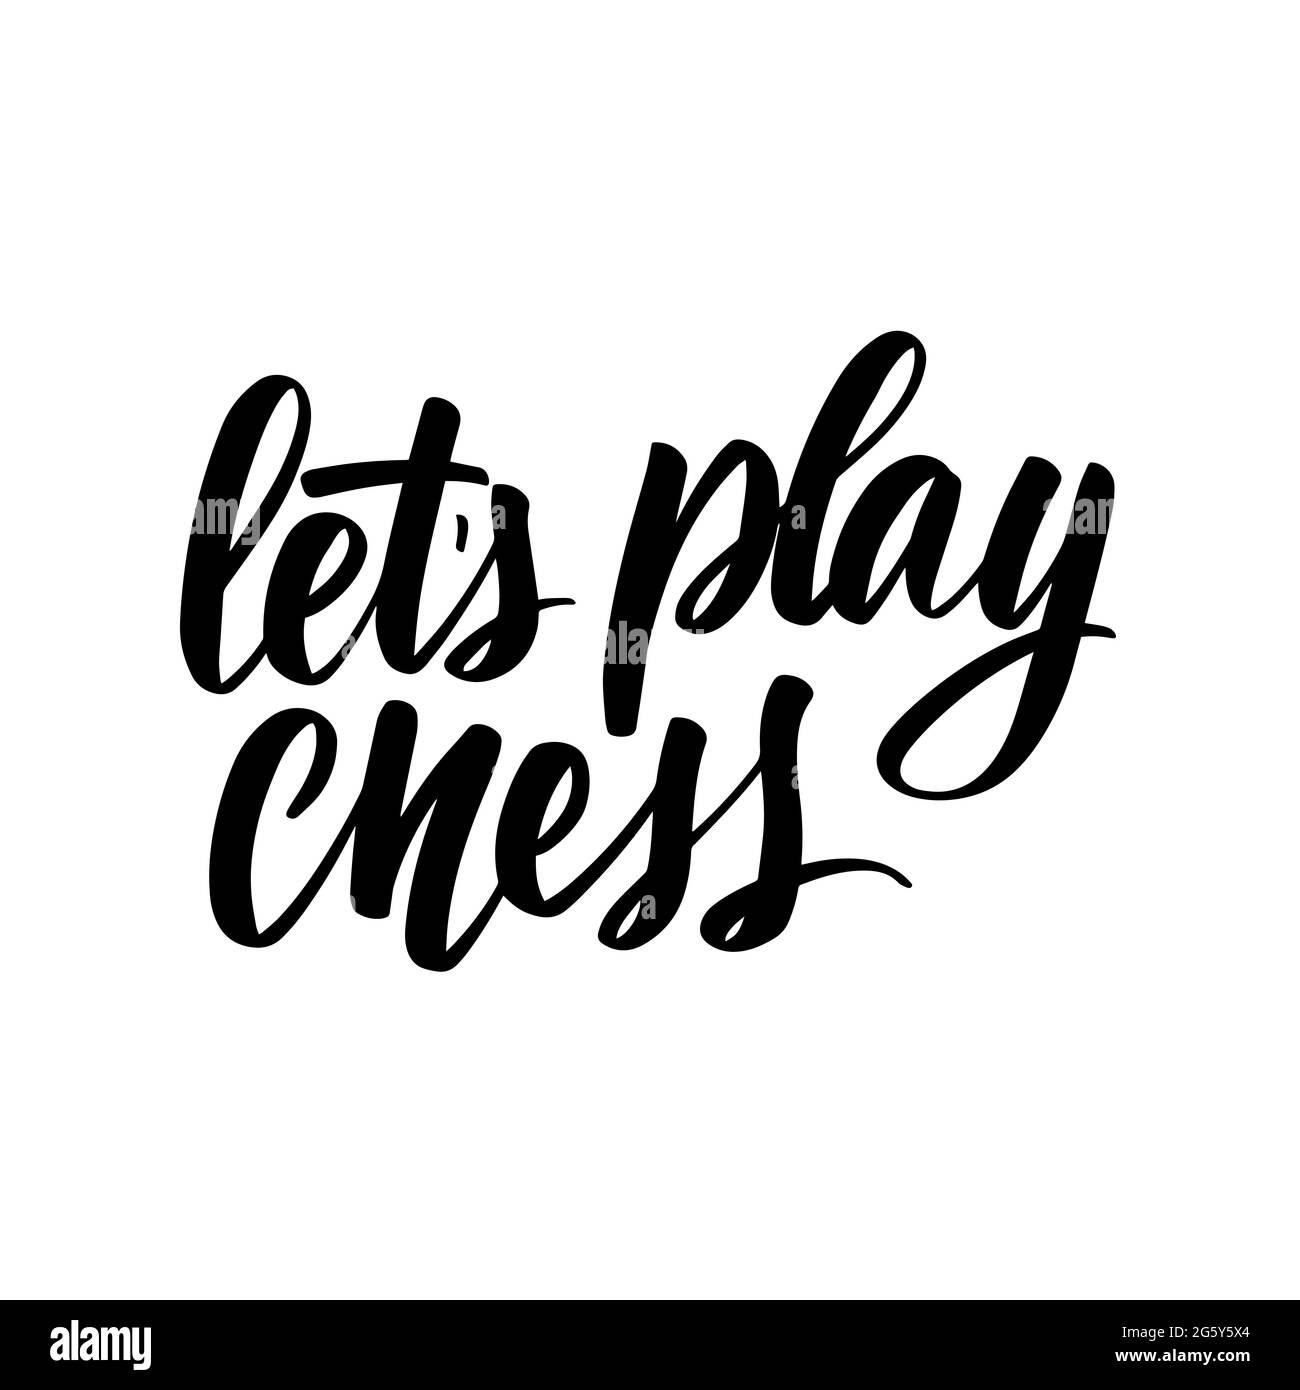 Let's play chess.